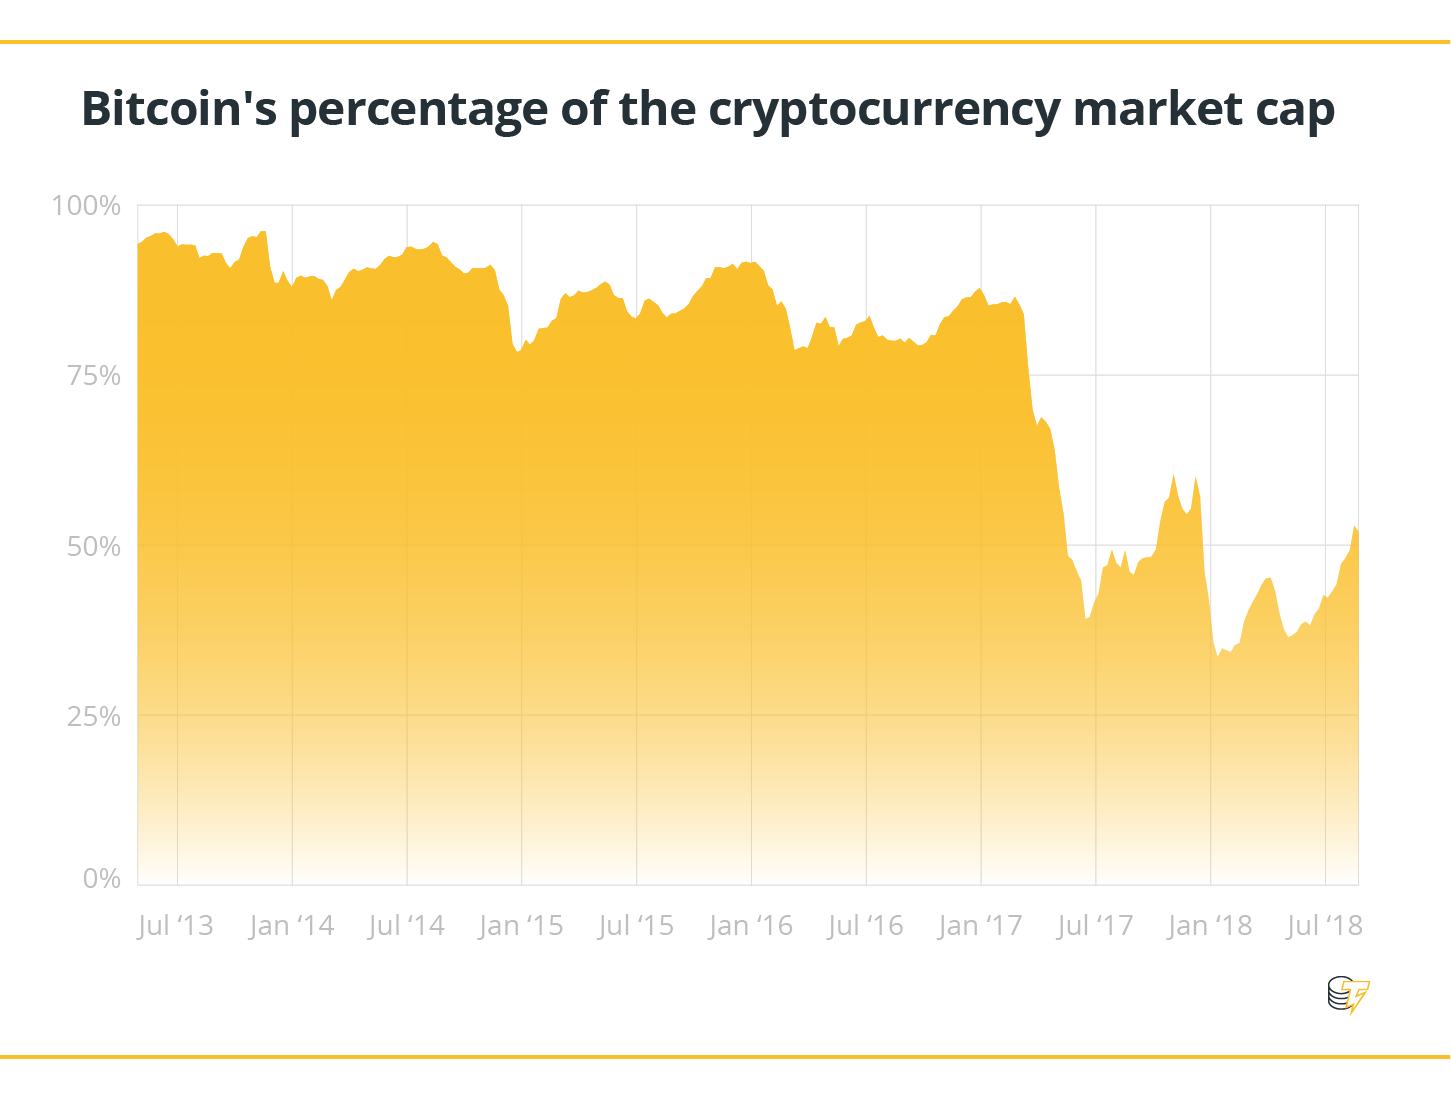 Bitcoin's percentage of the cryptocurrency market cap